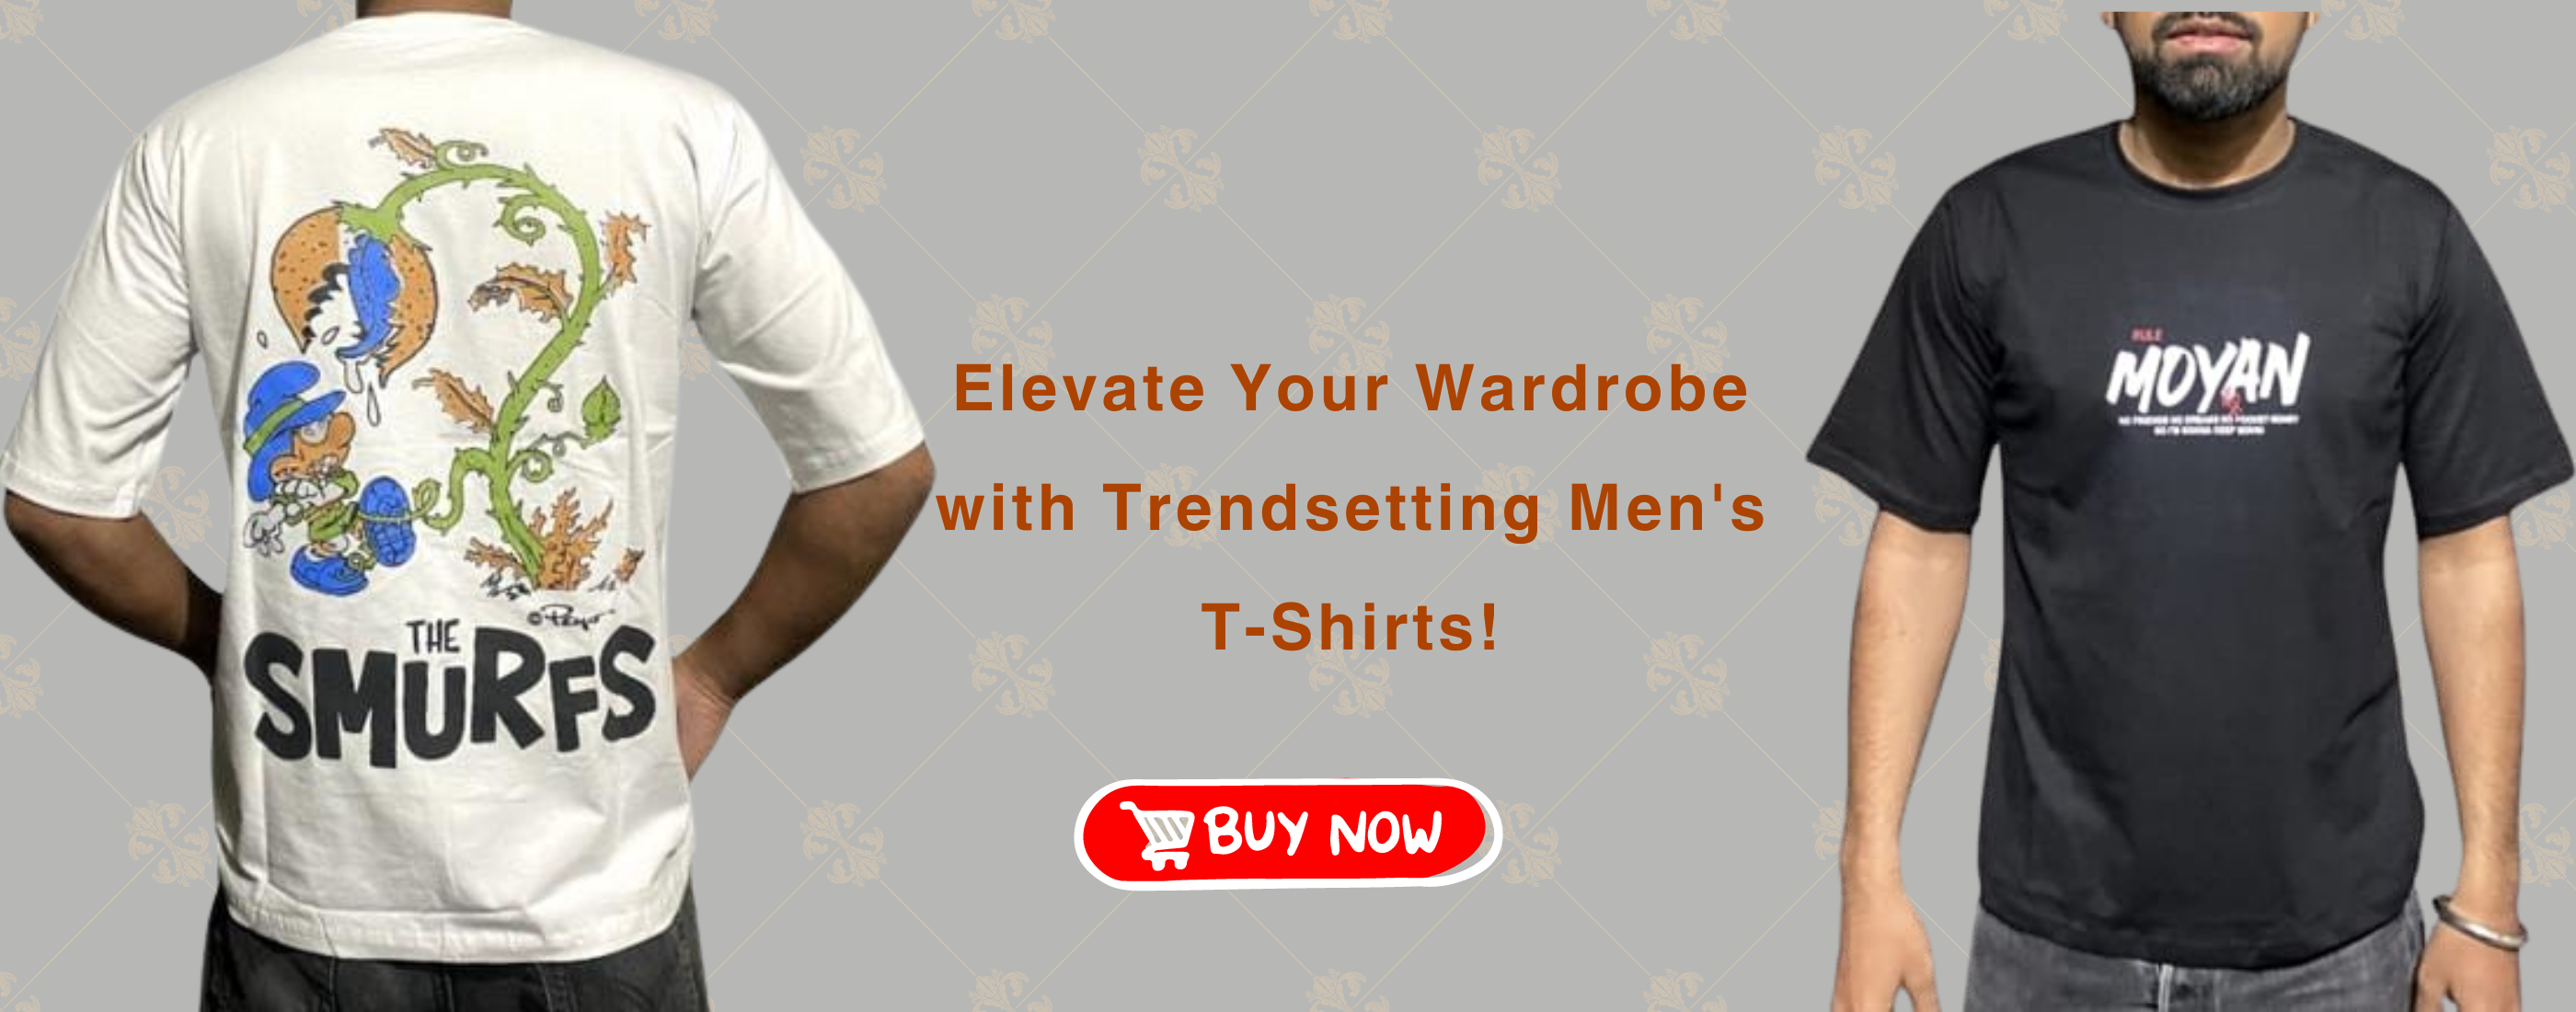 Elevate Your Wardrobe with Trendsetting Men's T-Shirts! (2)